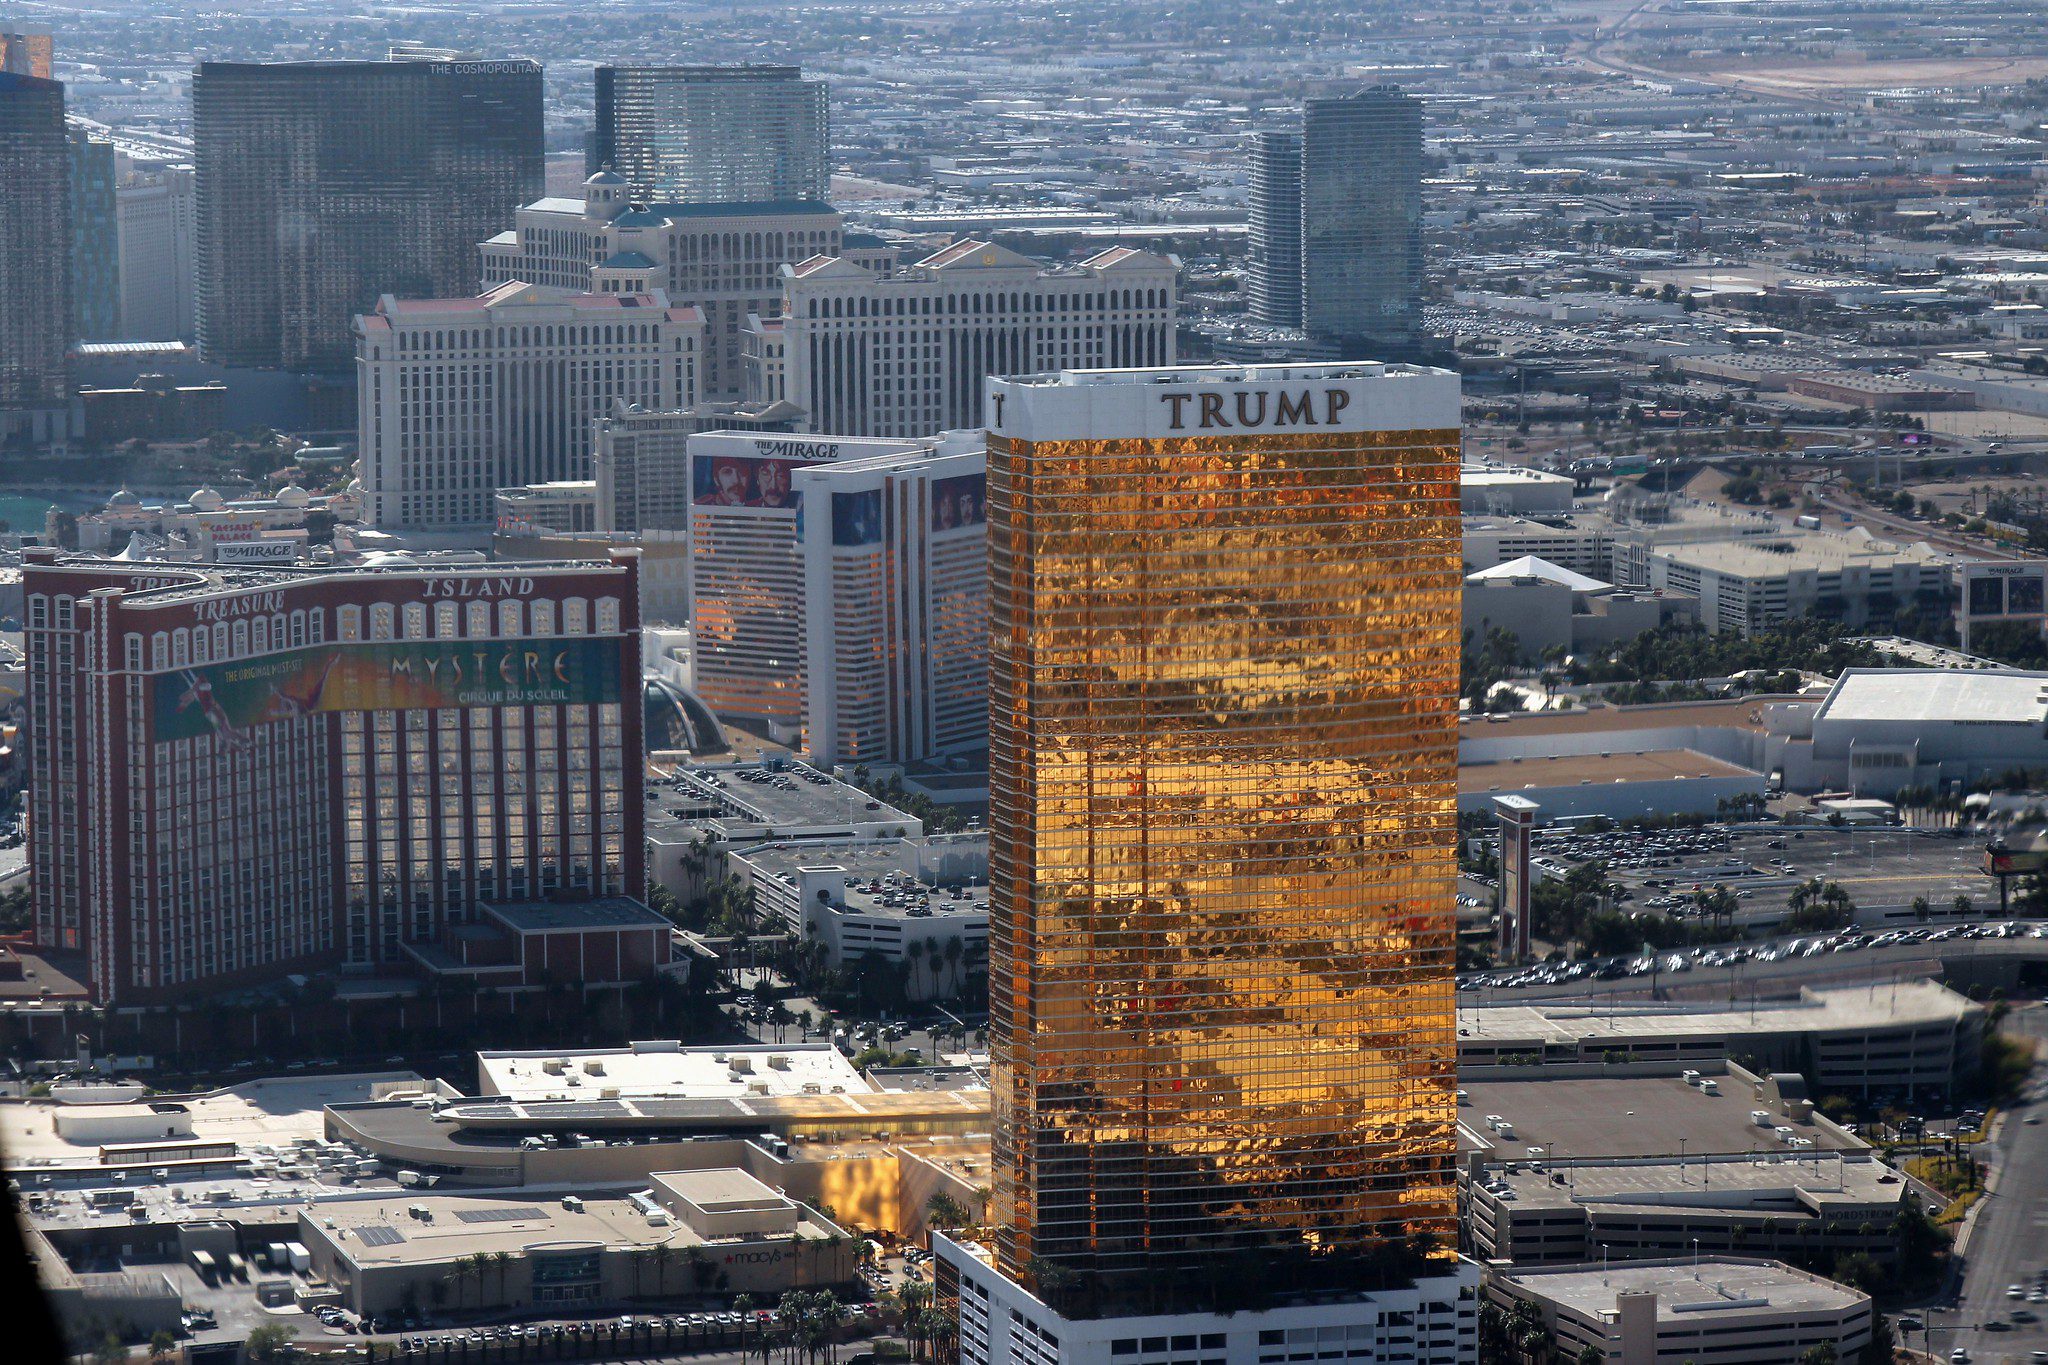 The Trump International Hotel Las Vegas (pictured) is among several Trump-related businesses struggling under the pandemic. Capitol Hill violence earlier this month may exacerbate the financial pain.